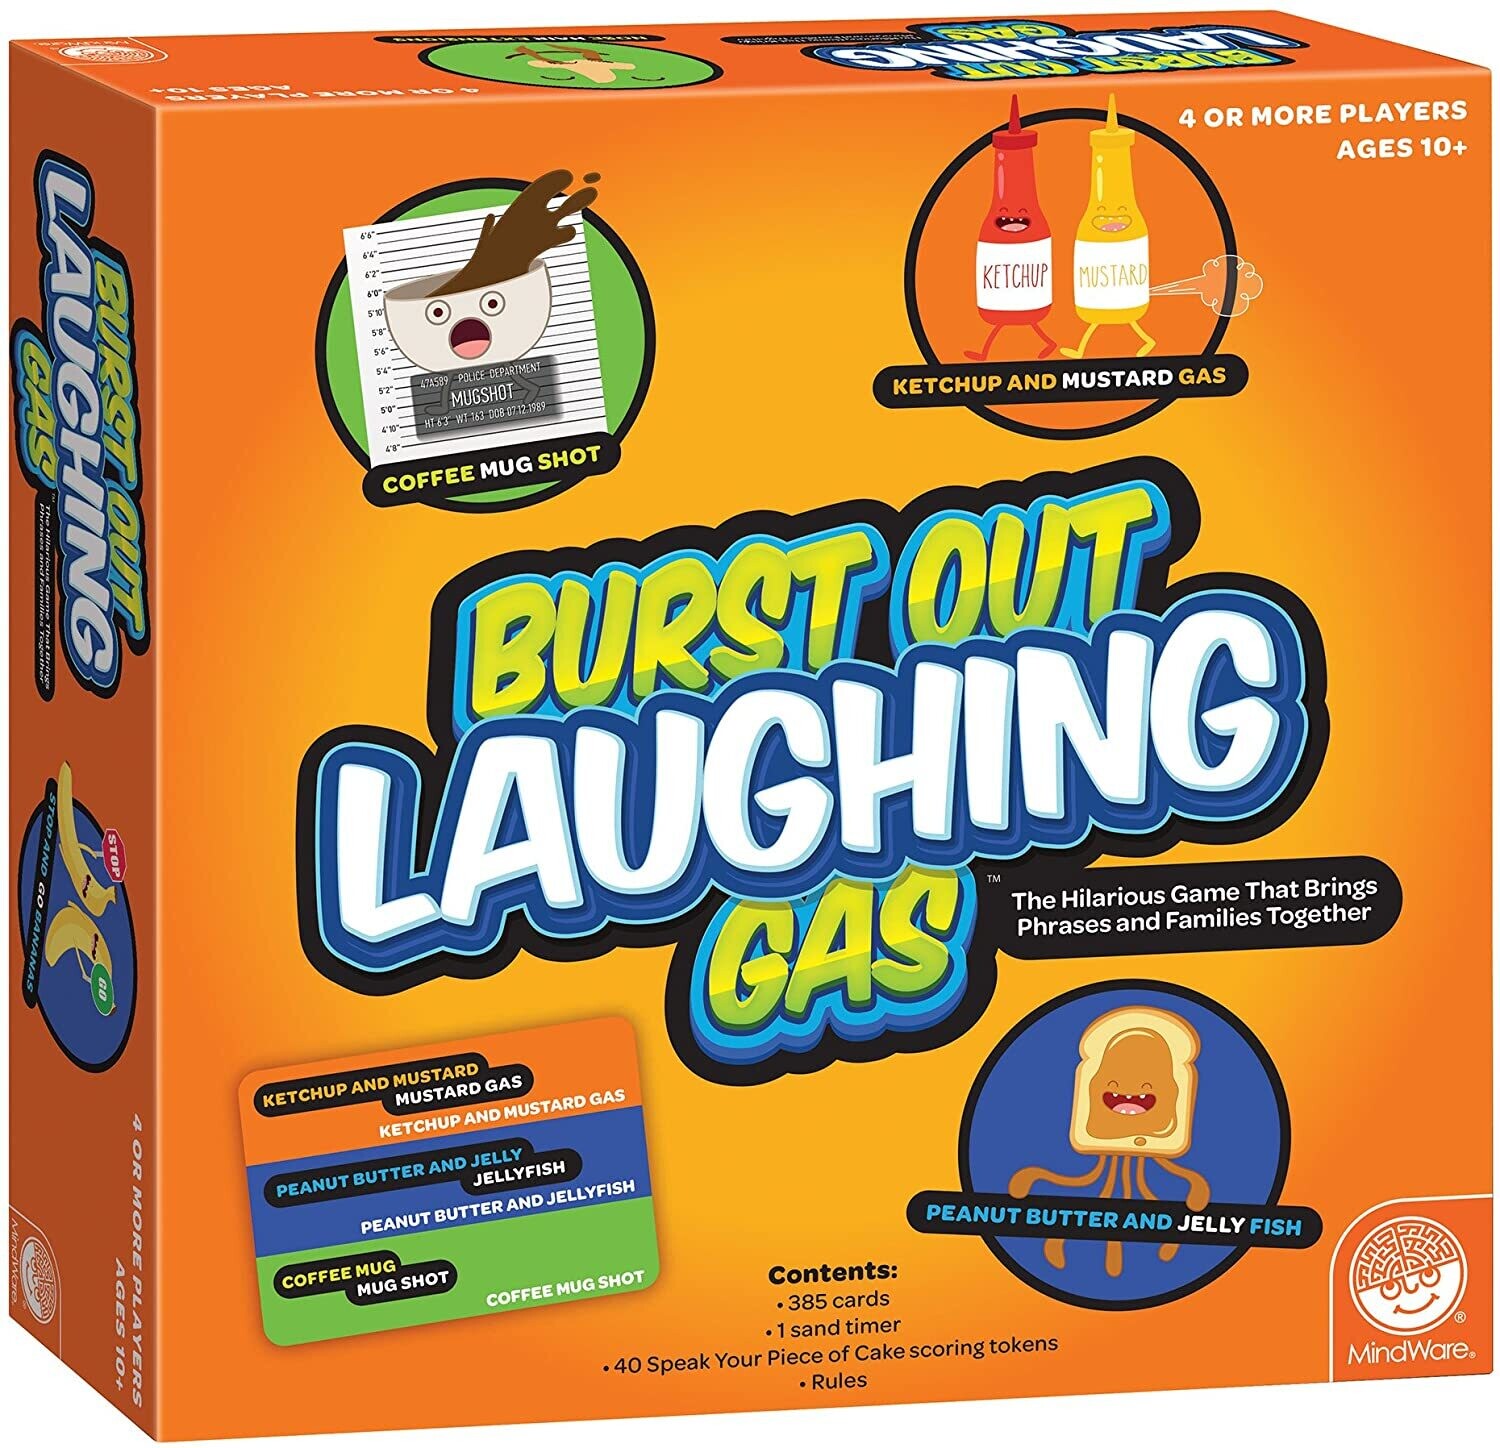 Burst Out Laughing Gas